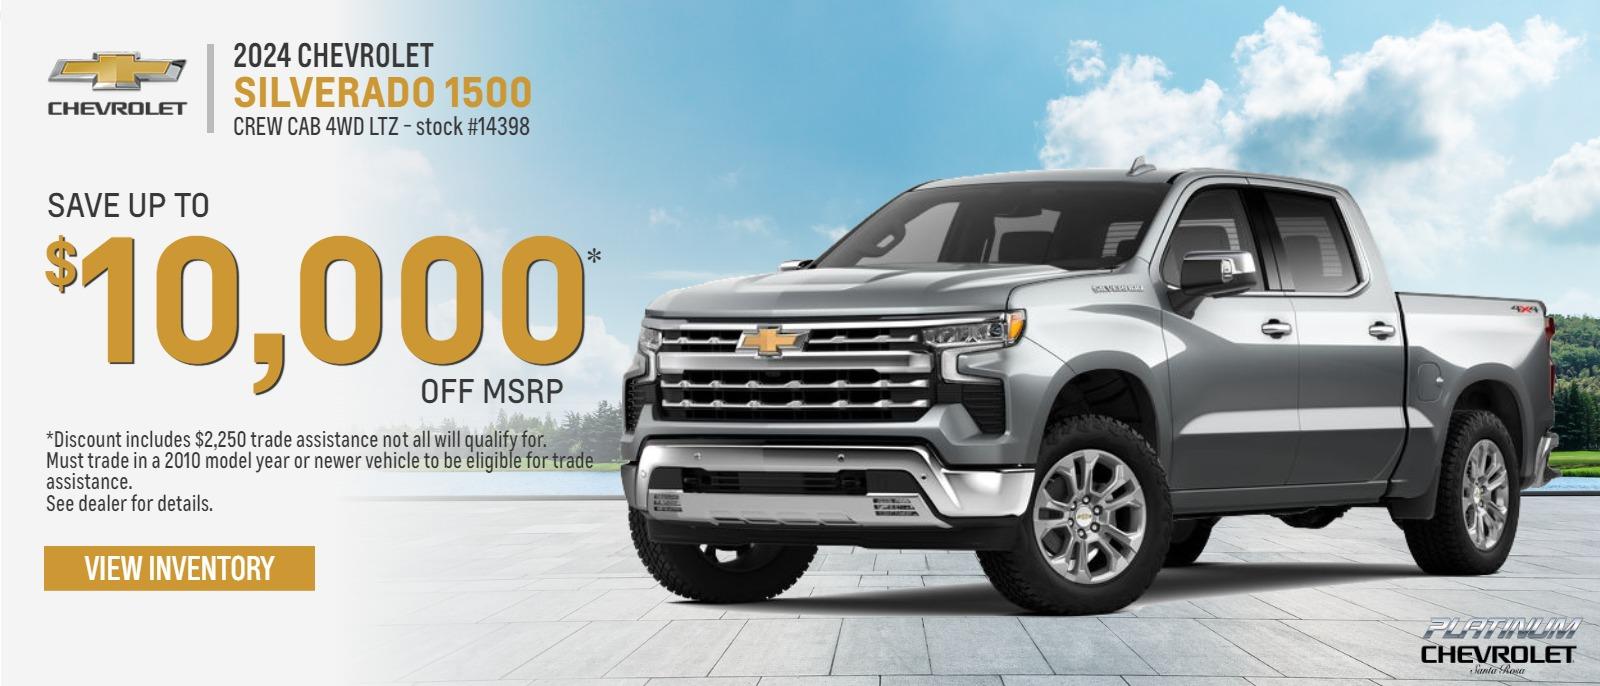 Save up to $10,000 off stock #14398